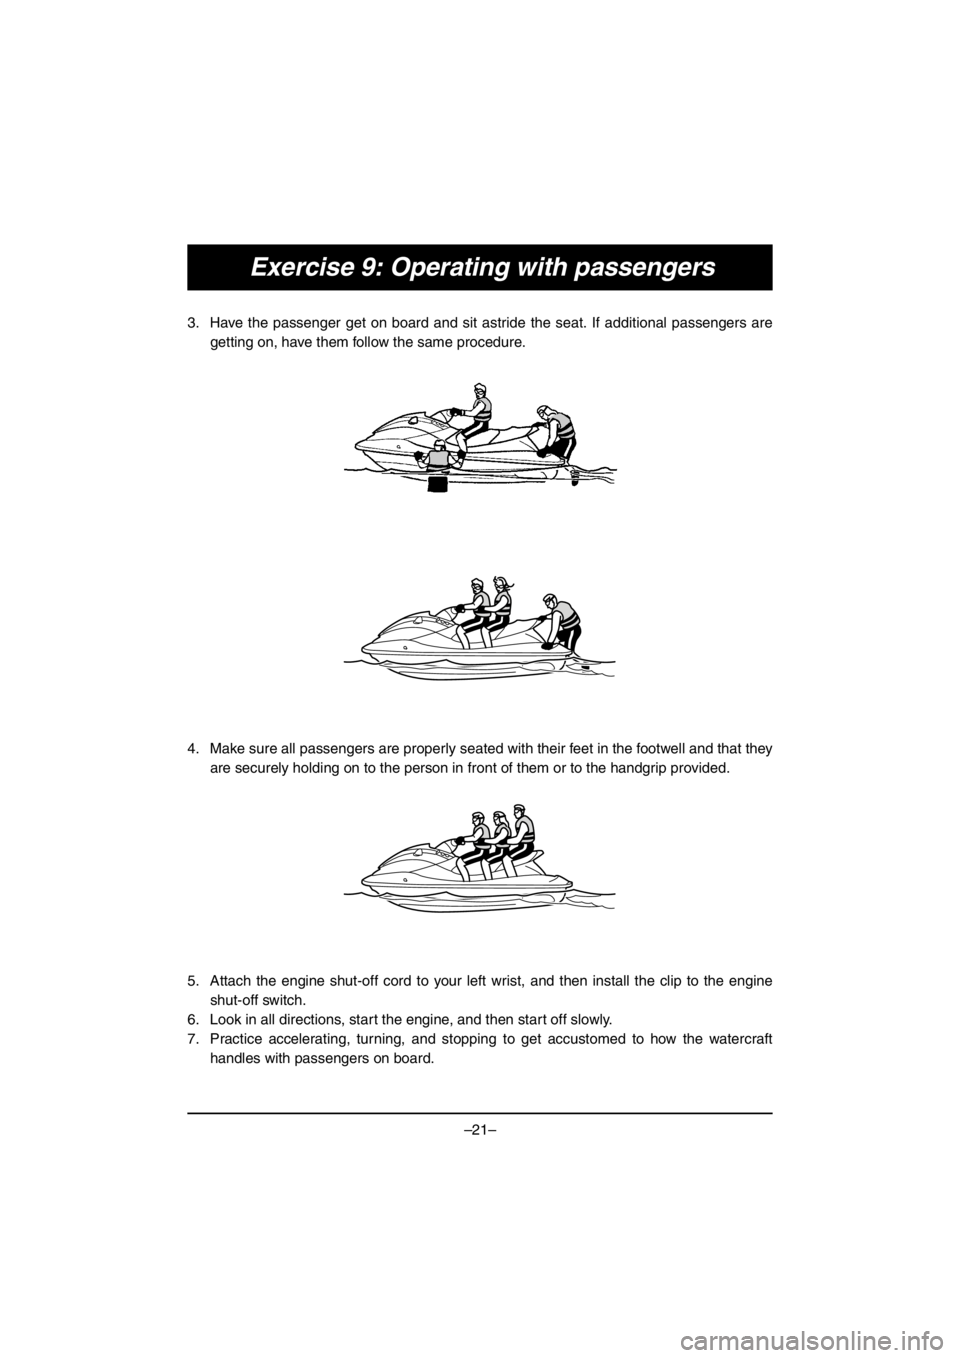 YAMAHA V1 2016 Owners Manual –21–
Exercise 9: Operating with passengers
3. Have the passenger get on board and sit astride the seat. If additional passengers are
getting on, have them follow the same procedure. 
4. Make sure 